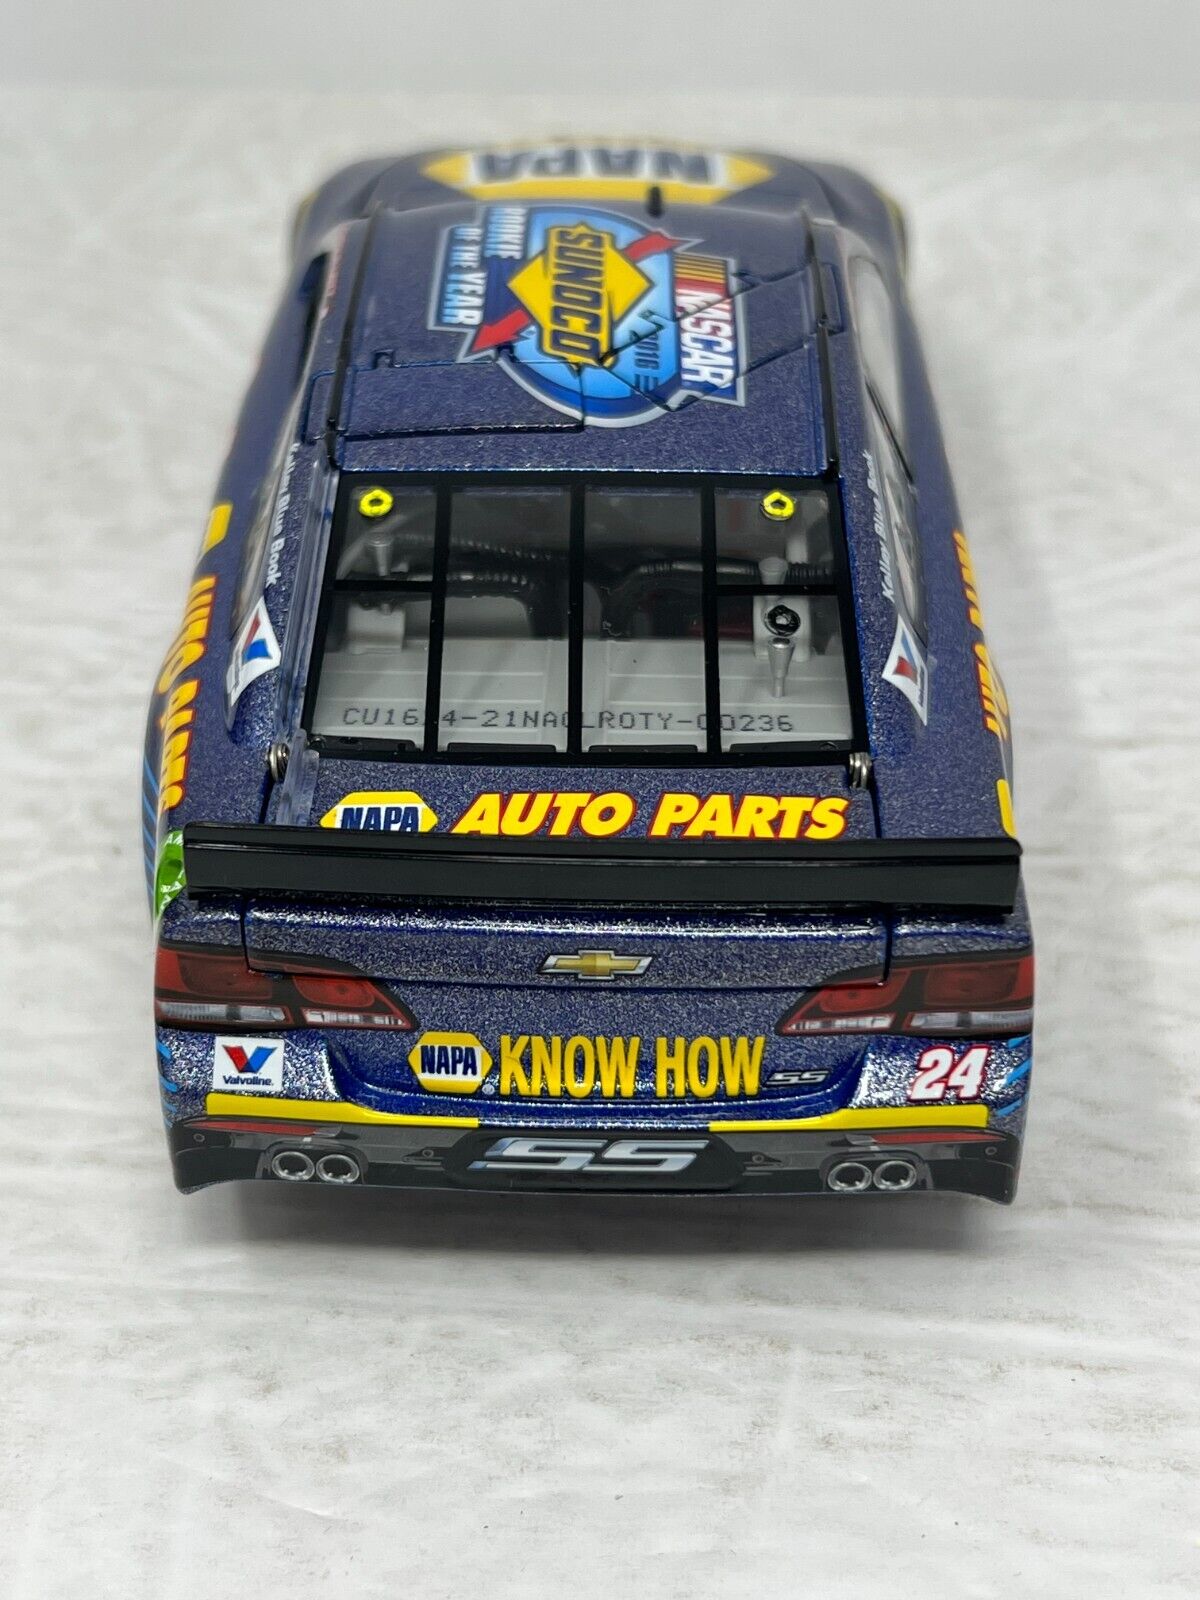 Lionel Racing Nascar #24 Chase Elliott Rookie of the Year Galaxy 1:24 Diecast